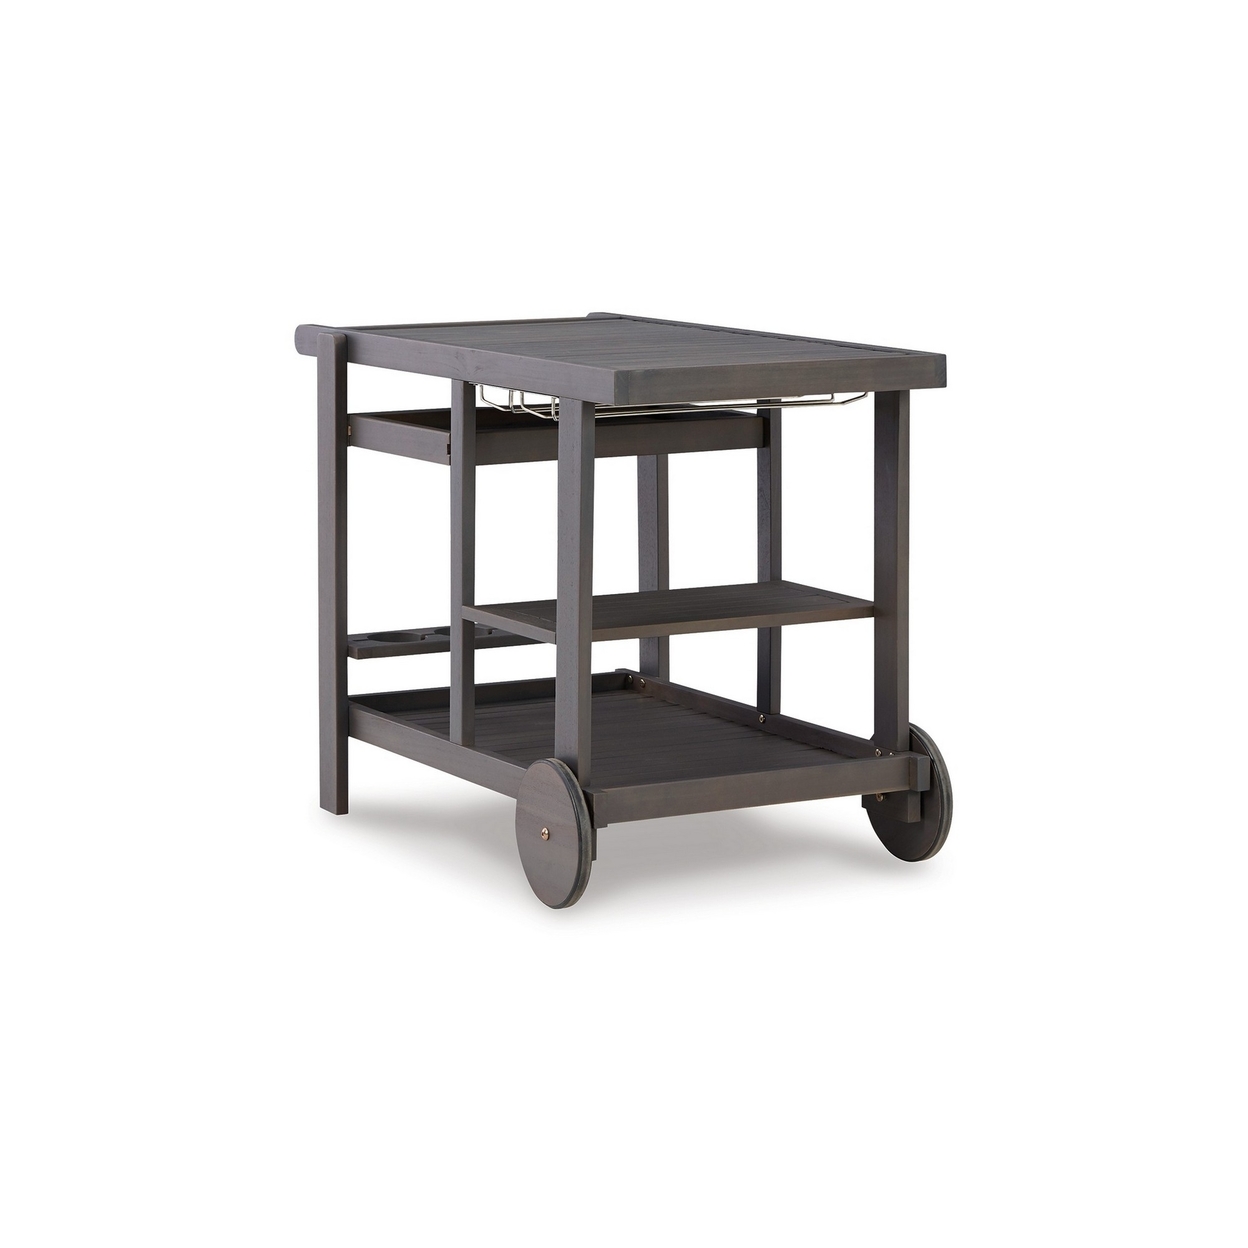 Clio 39 Inch Outdoor Serving Cart, Slatted Shelves, Removable Tray, Gray